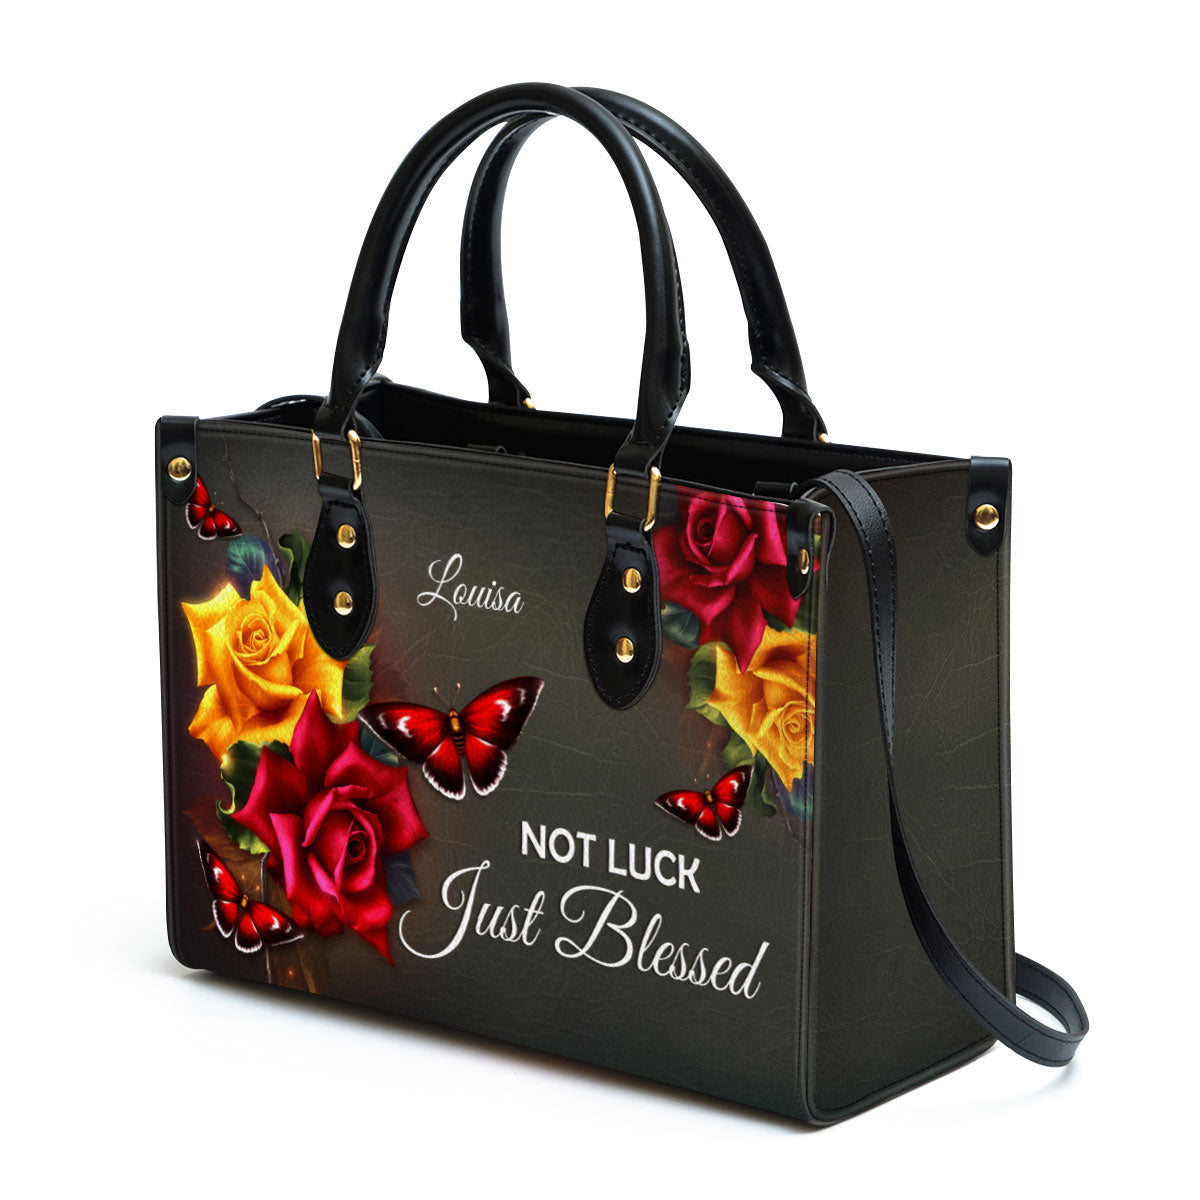 Not Luck Just Blessed Personalized Rose Leather Bag For Women, Religious Gifts For Women